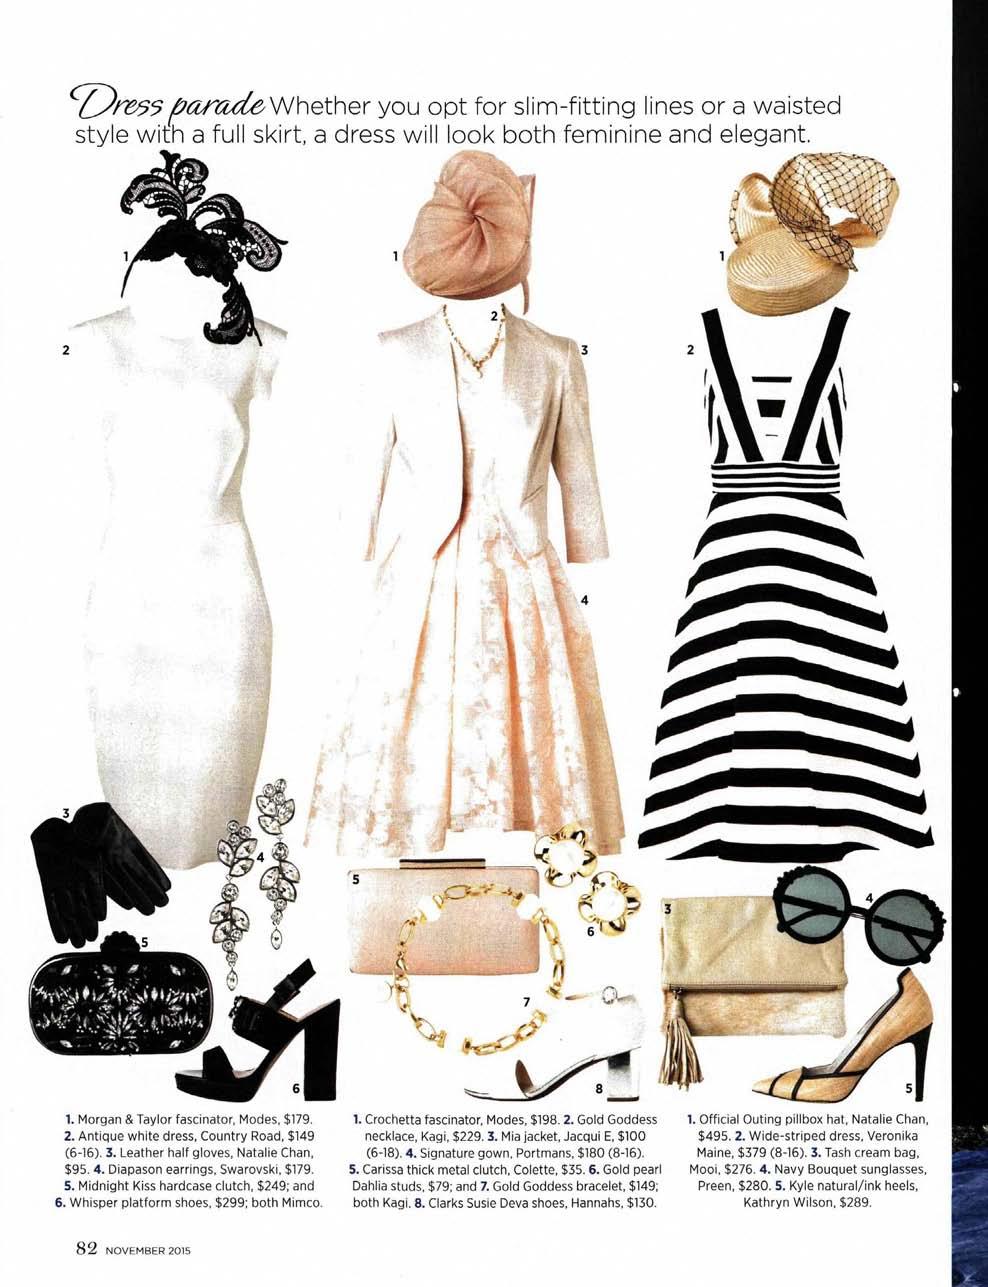 ID 485696969 BRIEF MEDIAJ(W INDEX 1 PAGE 3 of 8 parad&\nhe\her you opt for slim-fitting lines or a waisted style with a full skirt, a dress will look both feminine and elegant. 1. Morgan & Taylor fascinator, Modes, $179.